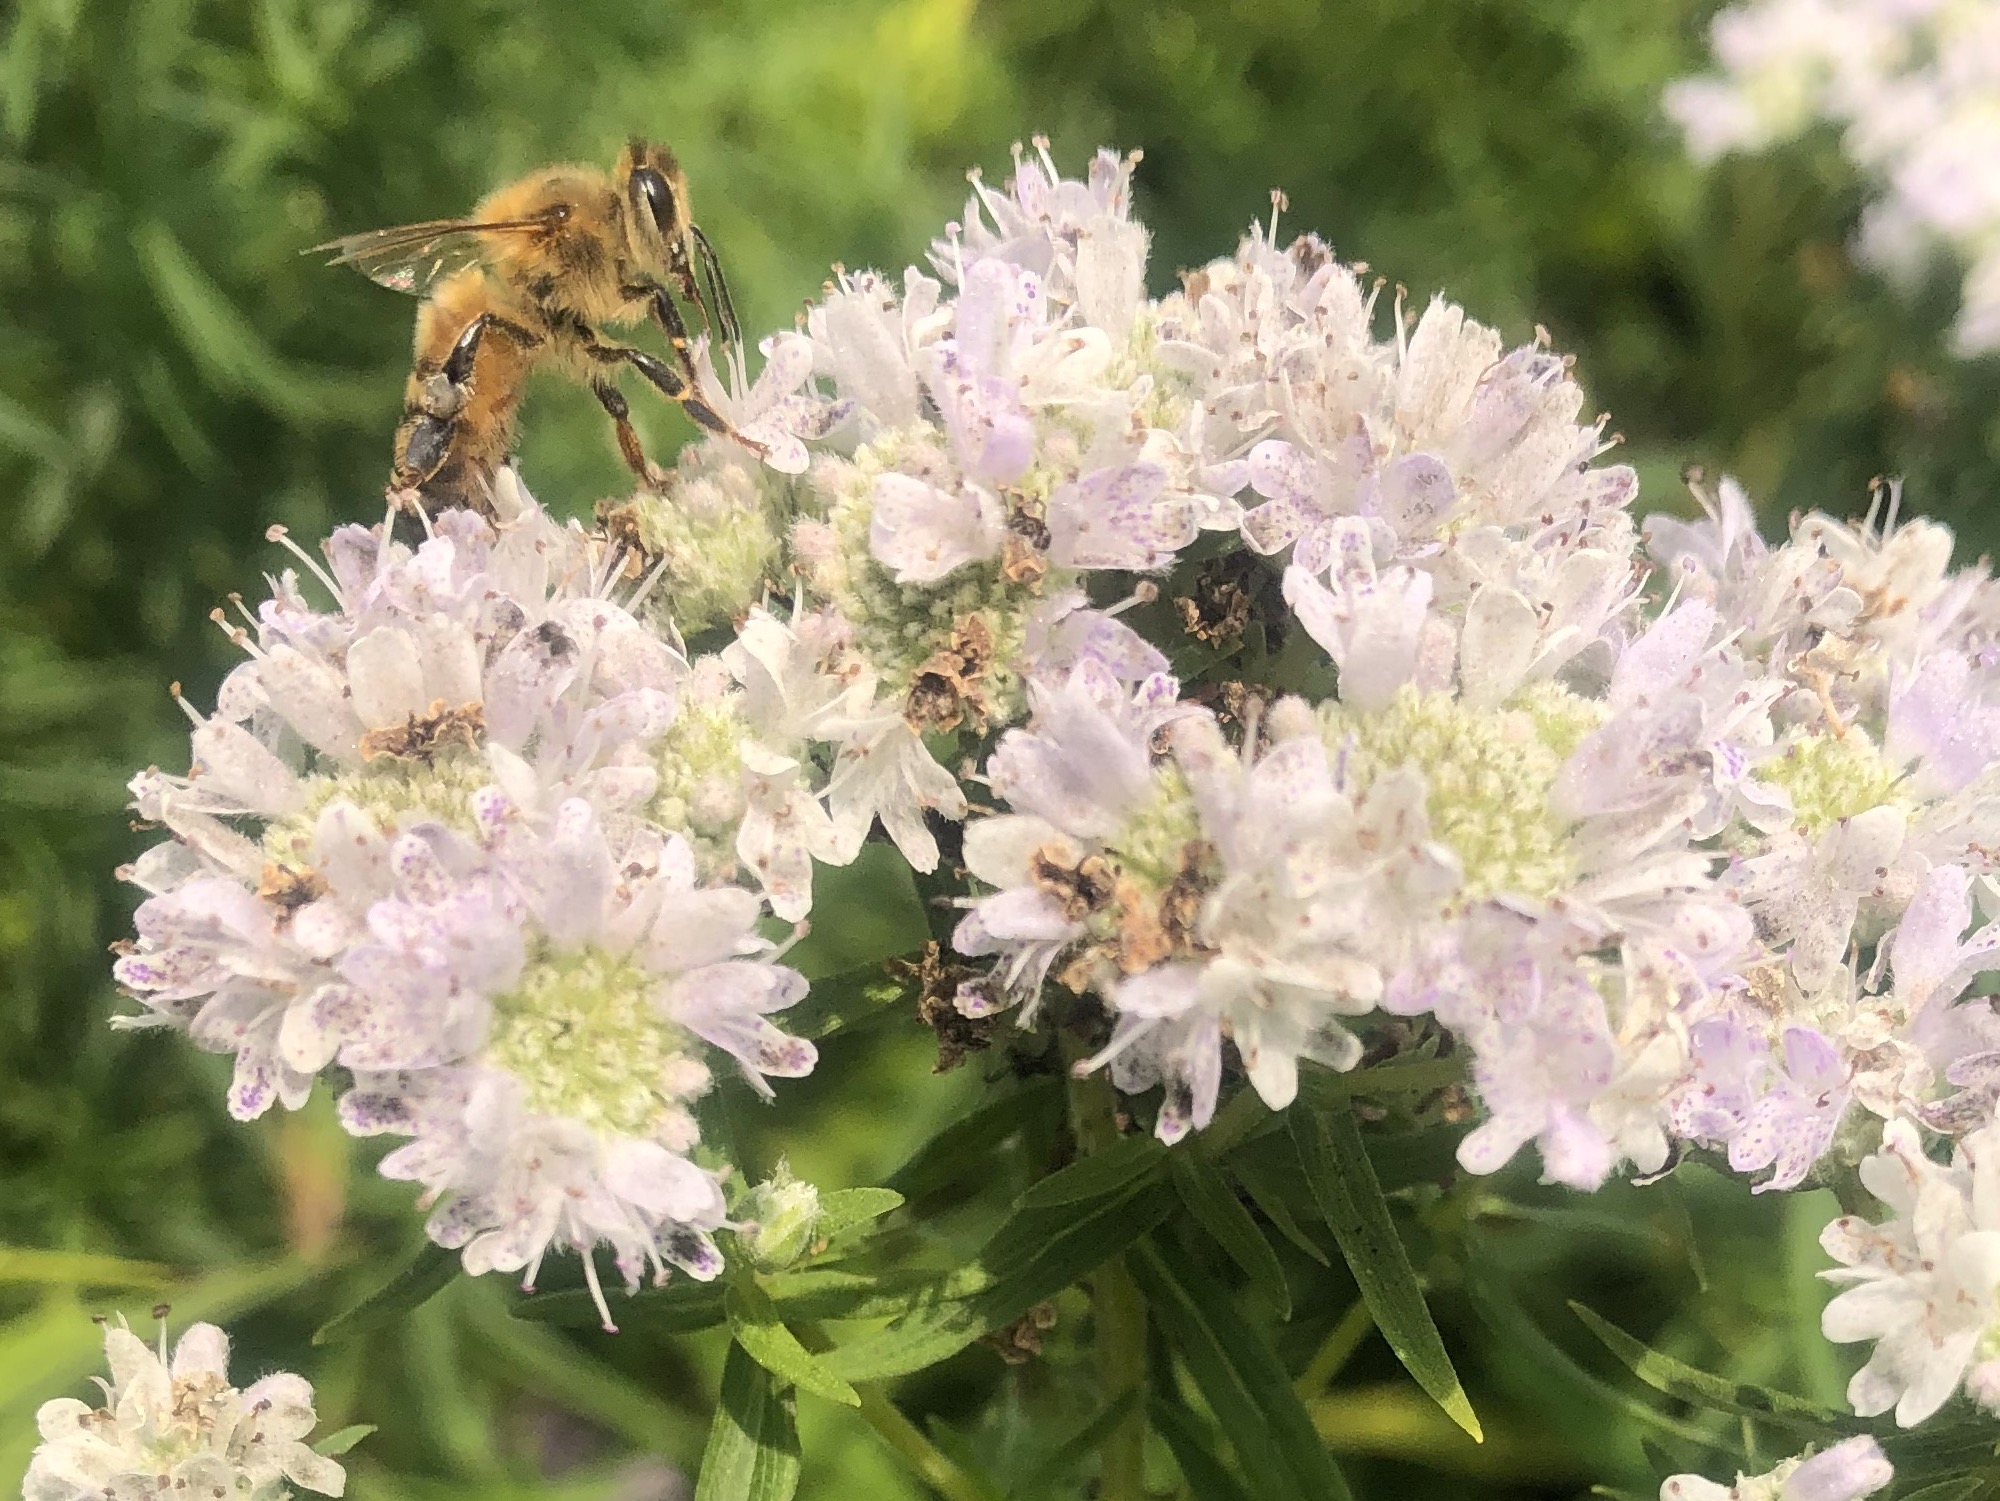 Bee on Common Mountain Mint overlooking Dawley Conservancy in Madison, Wisconsin on July 22, 2021.